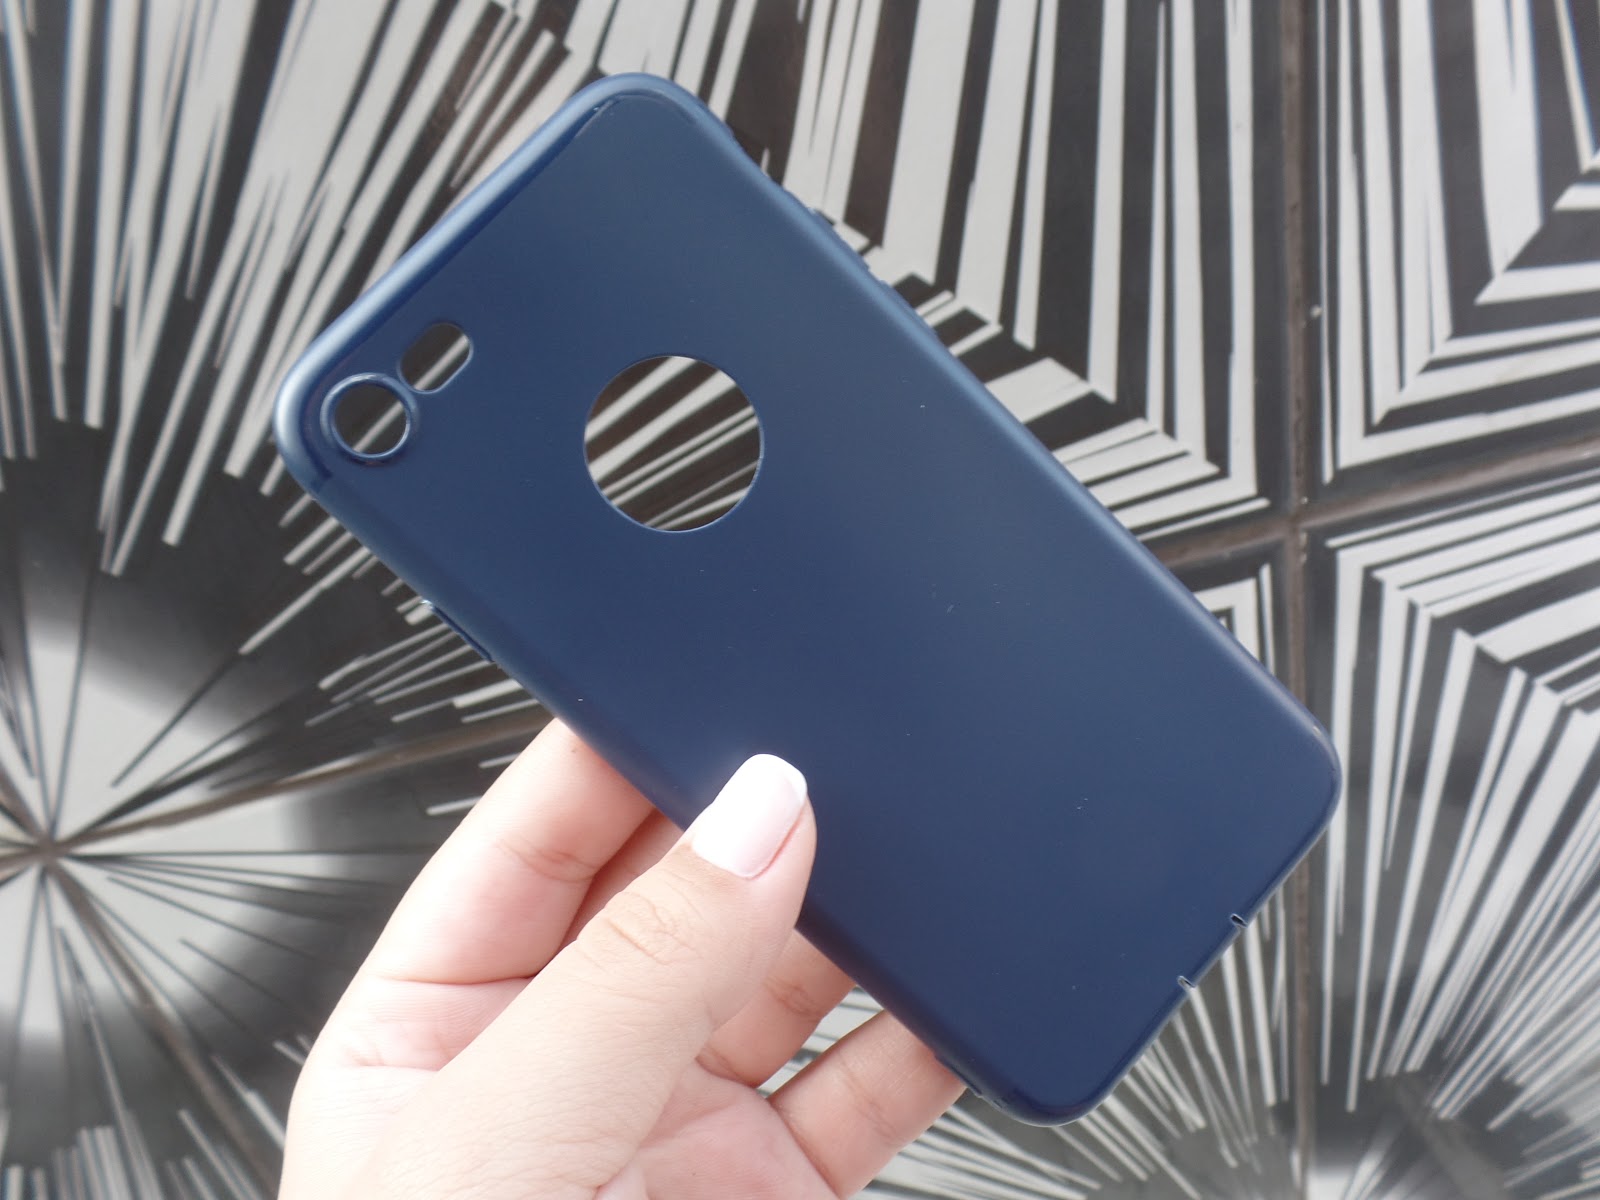 https://www.banggood.com/Bakeey-Ultra-thin-Soft-TPU-Matte-Silicone-Dustproof-Back-Cover-Case-for-iPhone-7-4_7-inch-p-1142946.html?utm_source=seo&utm_medium=organic&utm_campaign=14878842&utm_content=10360